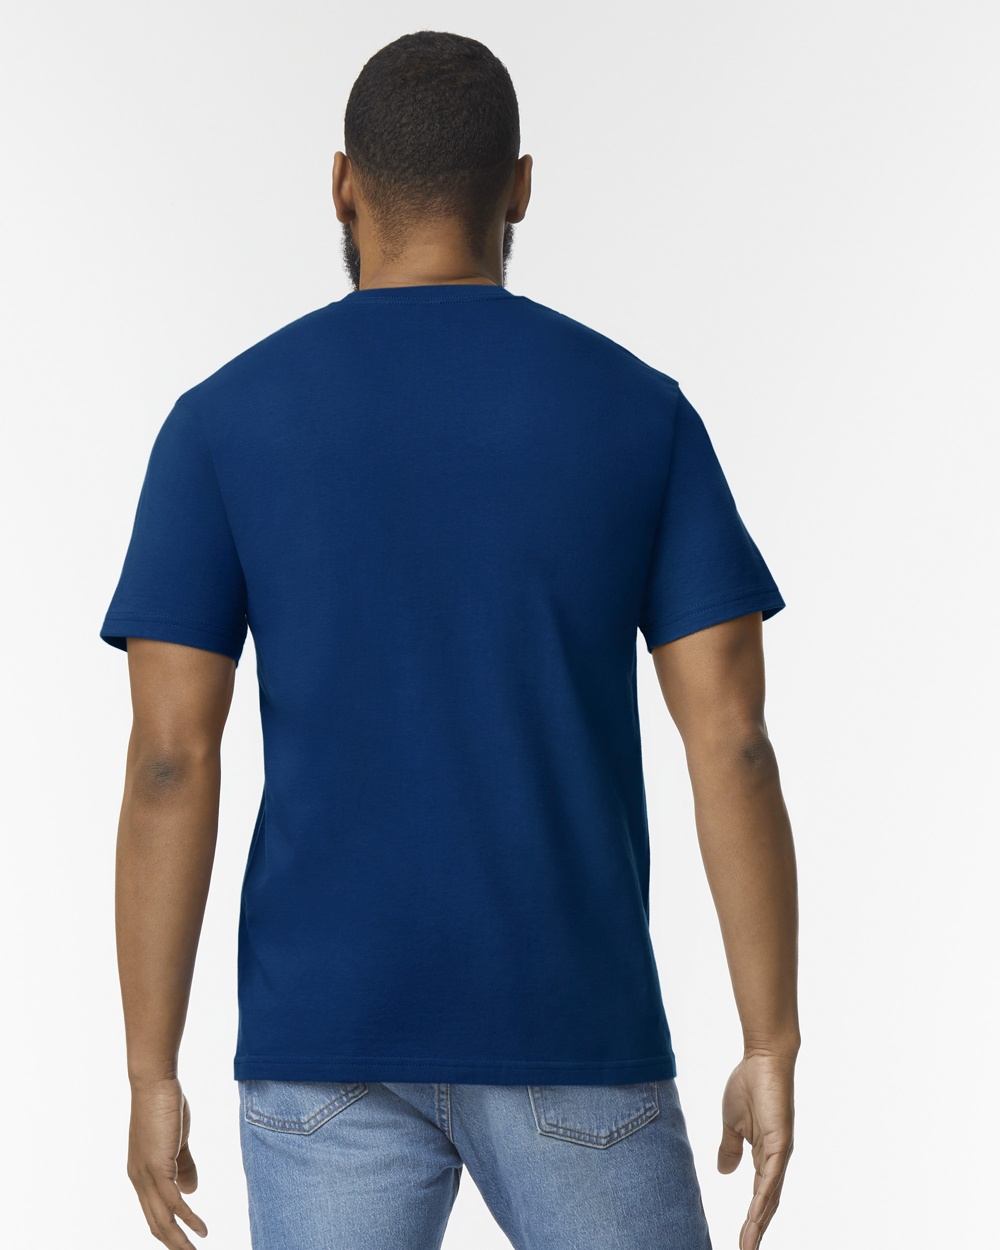 GD65000 - Softstyle® Midweight Adult T-Shirt - One Stop